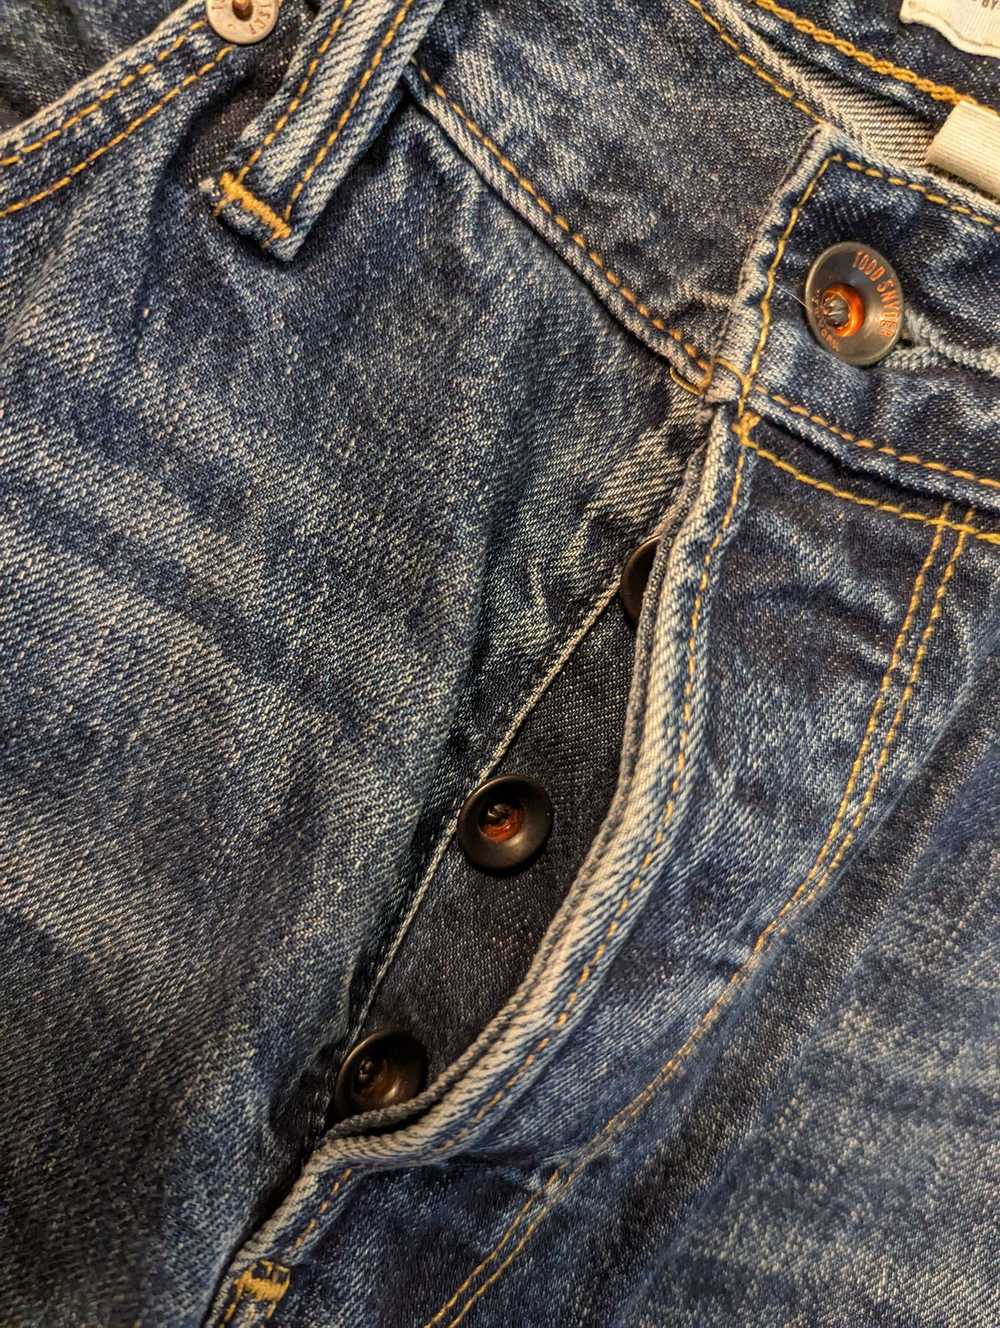 Todd Snyder Selvedge jeans - image 6